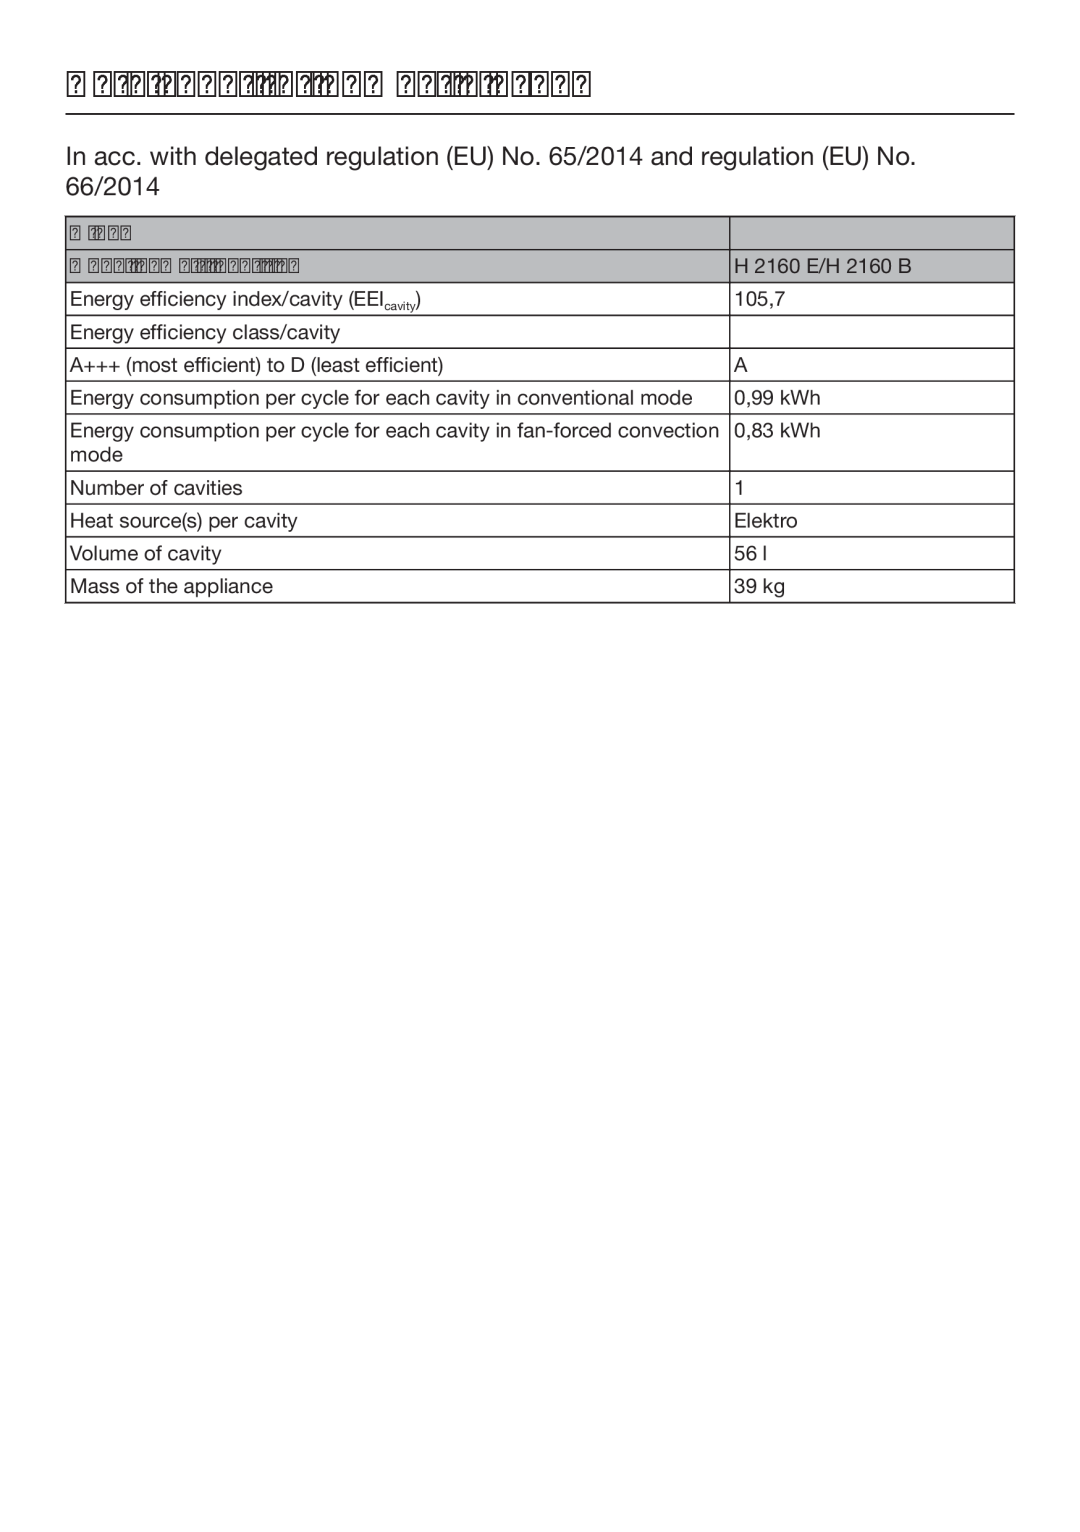 Miele 10 102 470 installation instructions Data sheet for domestic ovens, Miele, Model name / identifier 